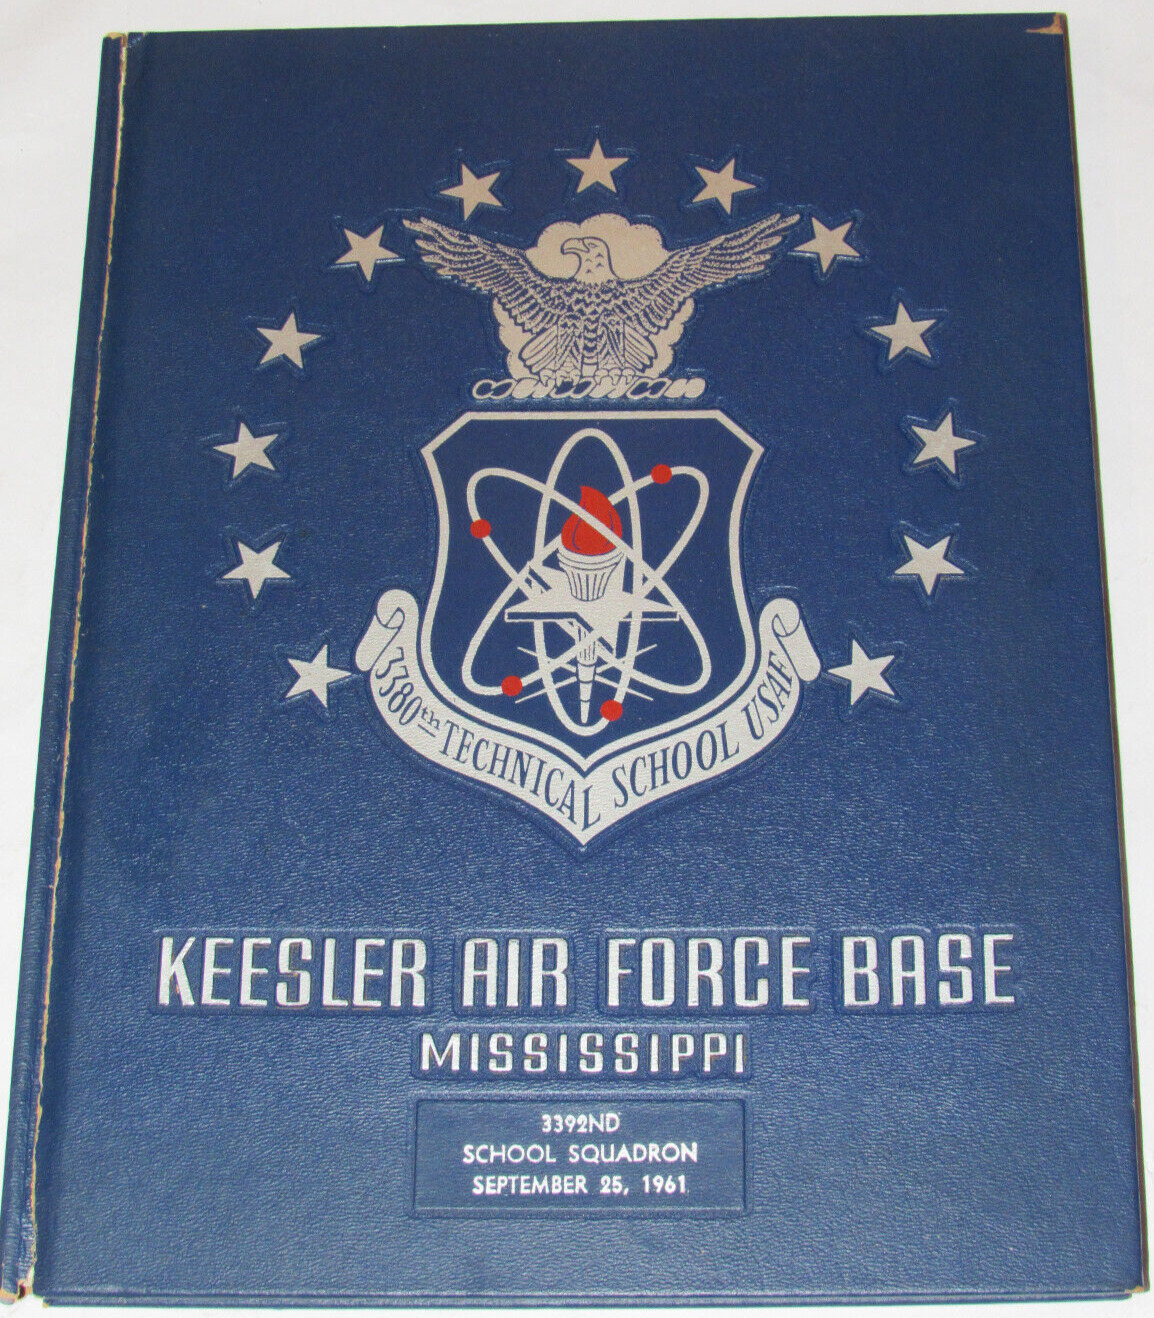 1961 USAF KEESLER AIR FORCE BASE MISSISSIPPI TECHNICAL SCHOOL YEARBOOK 3392ND